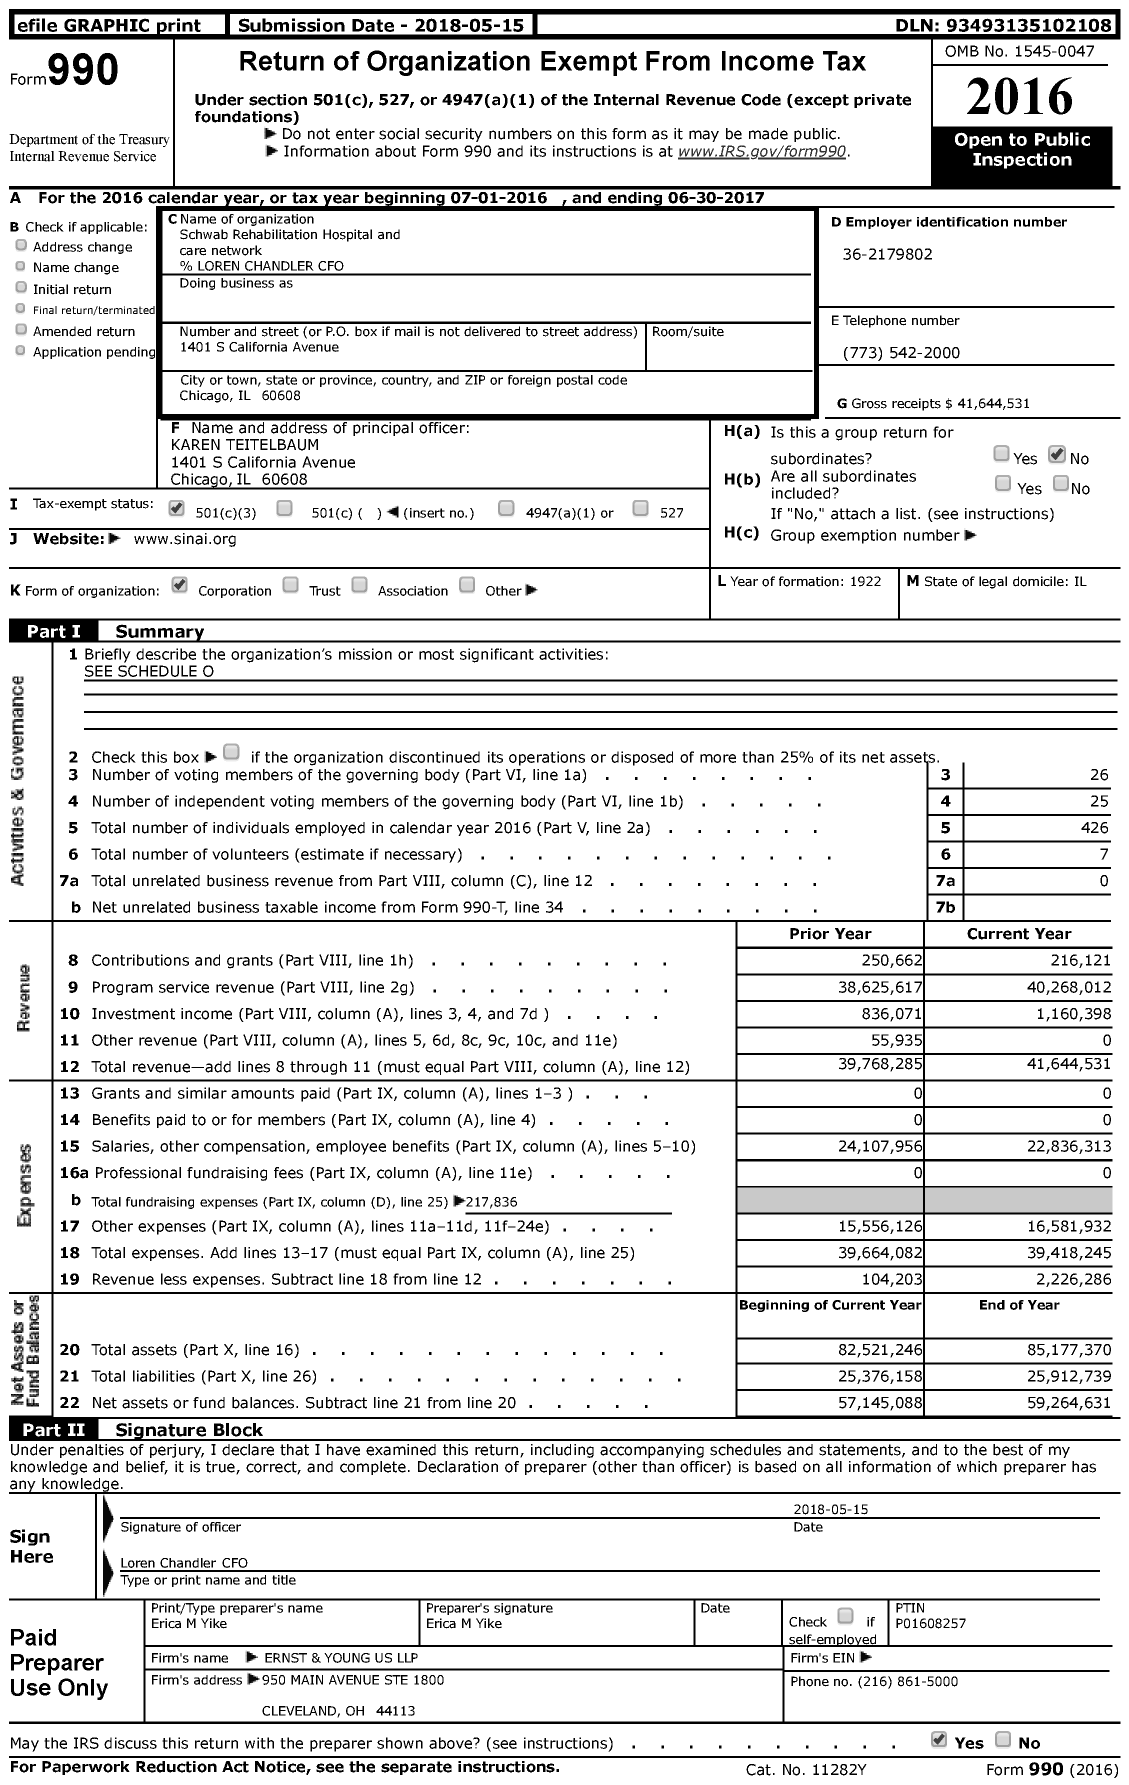 Image of first page of 2016 Form 990 for Schwab Rehabilitation Hospital and care network